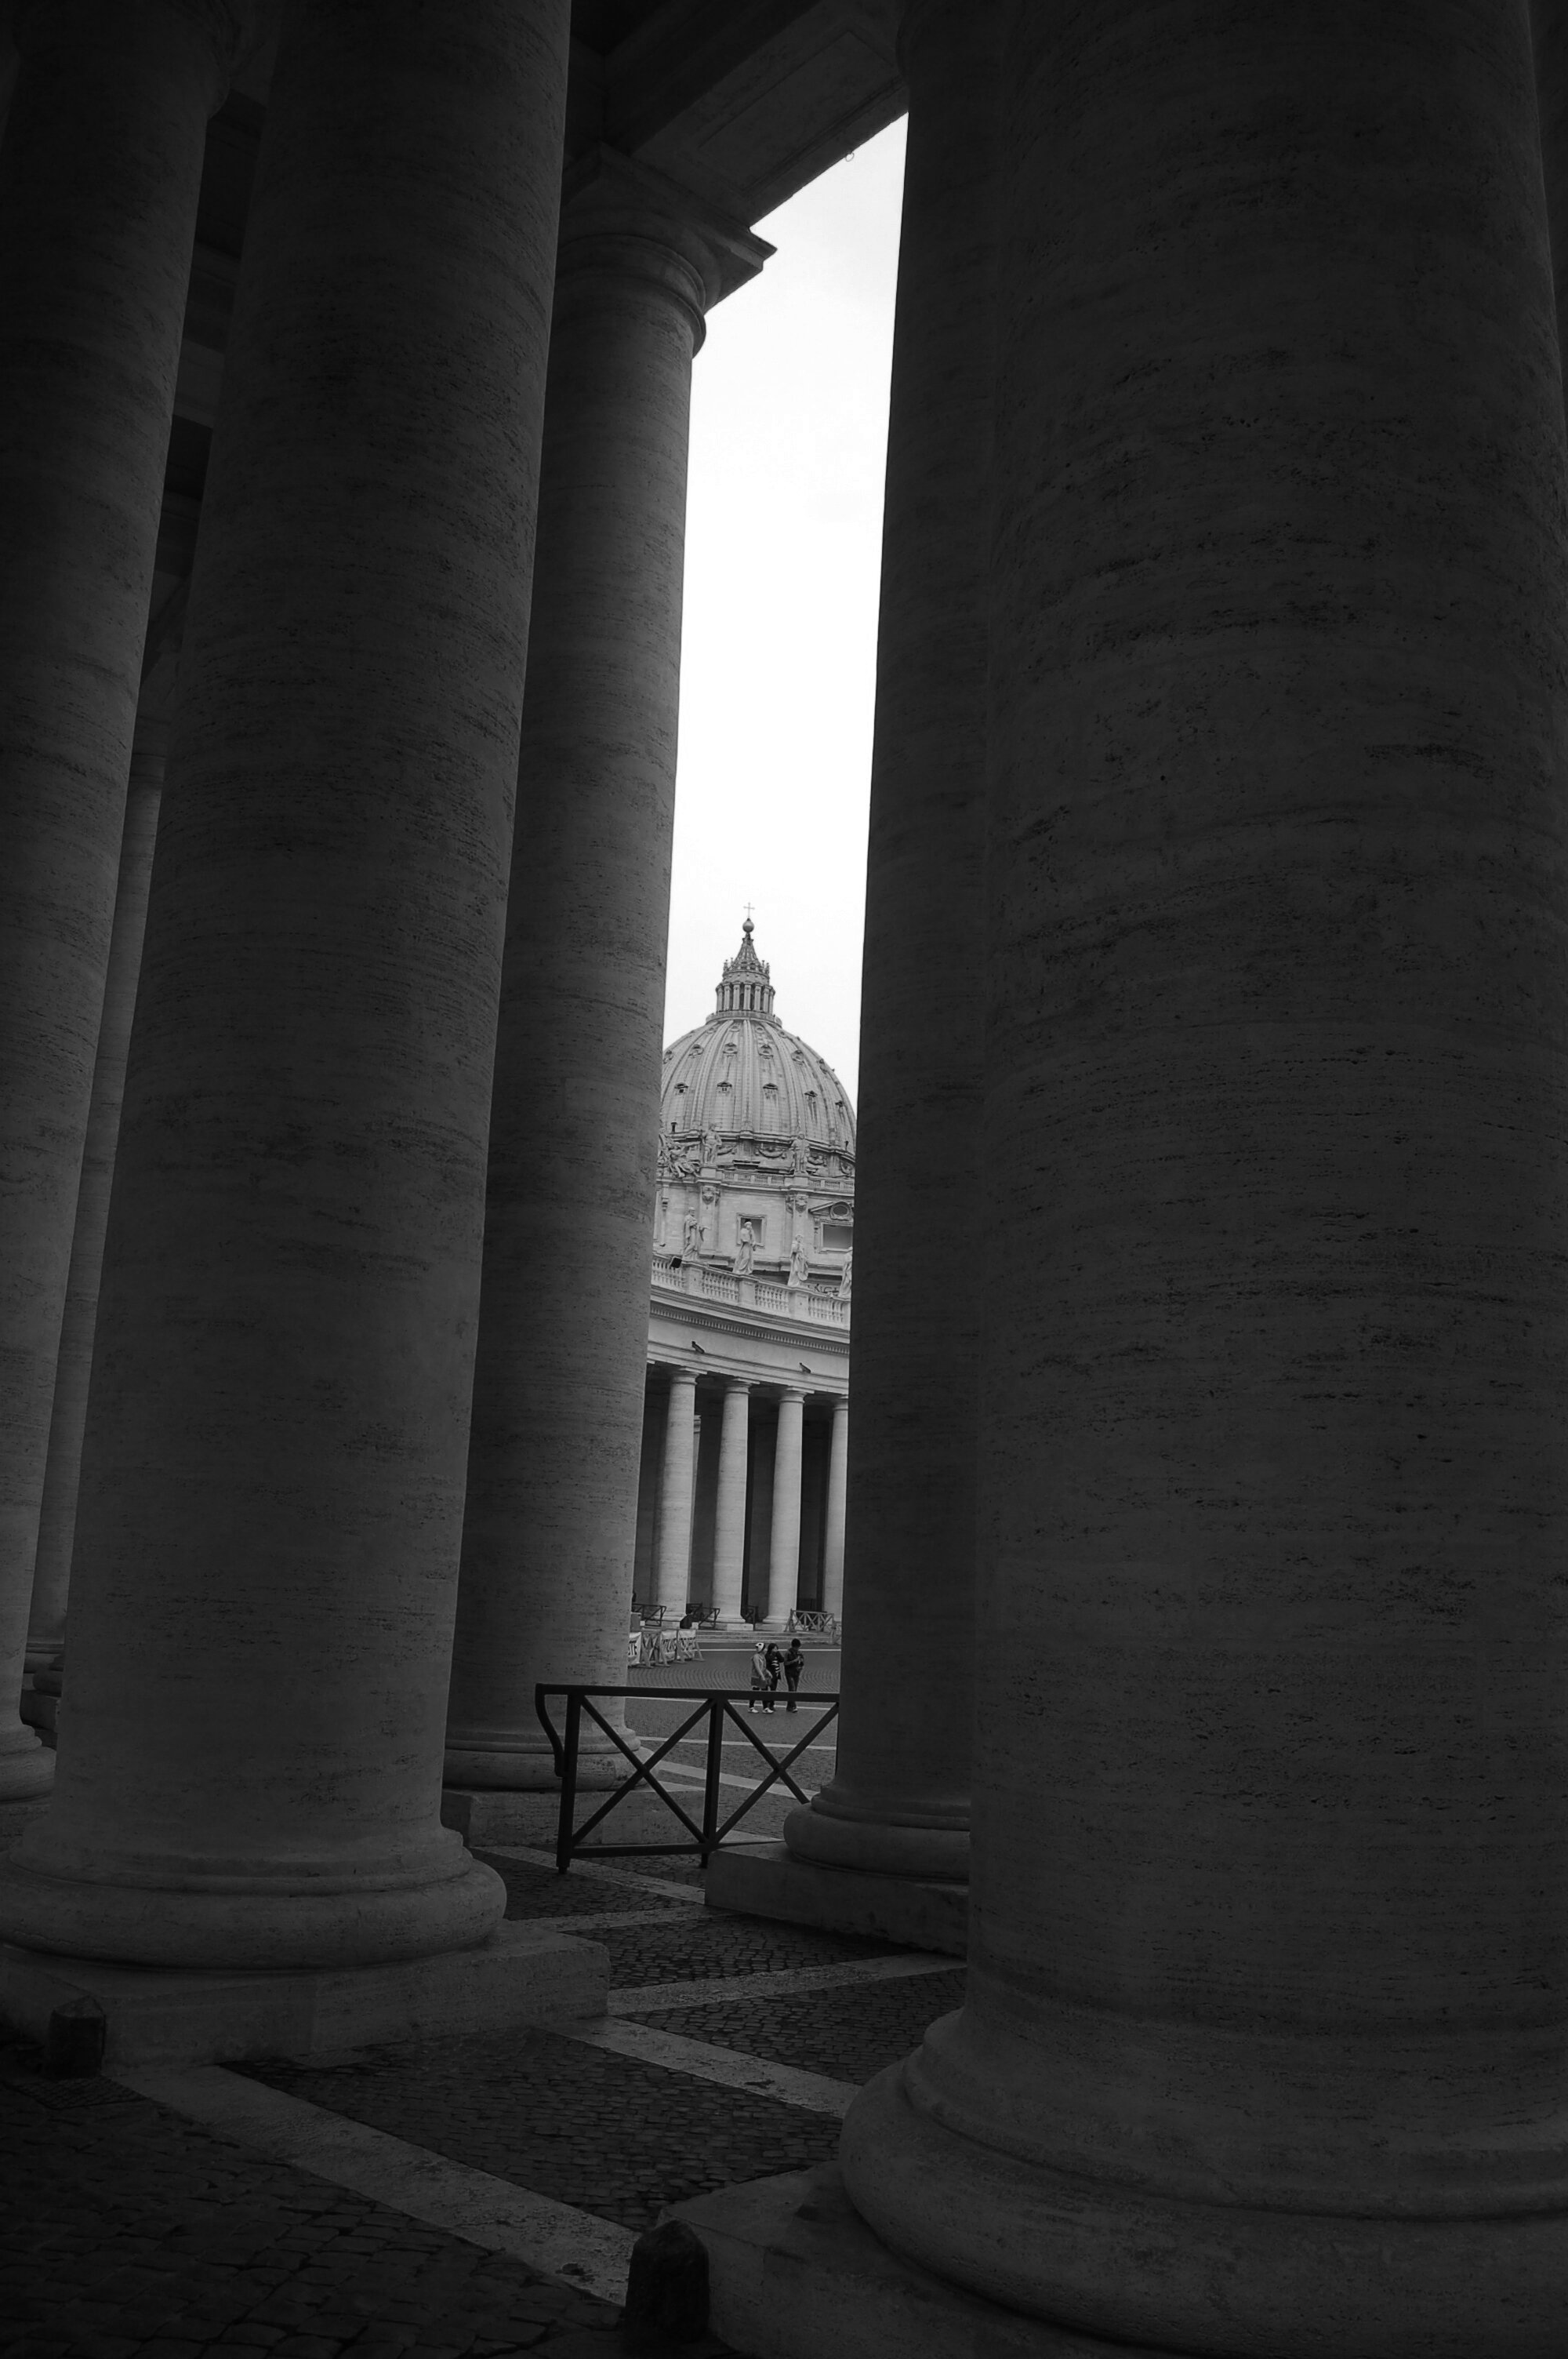 Title: A Glimpse of St. Peters